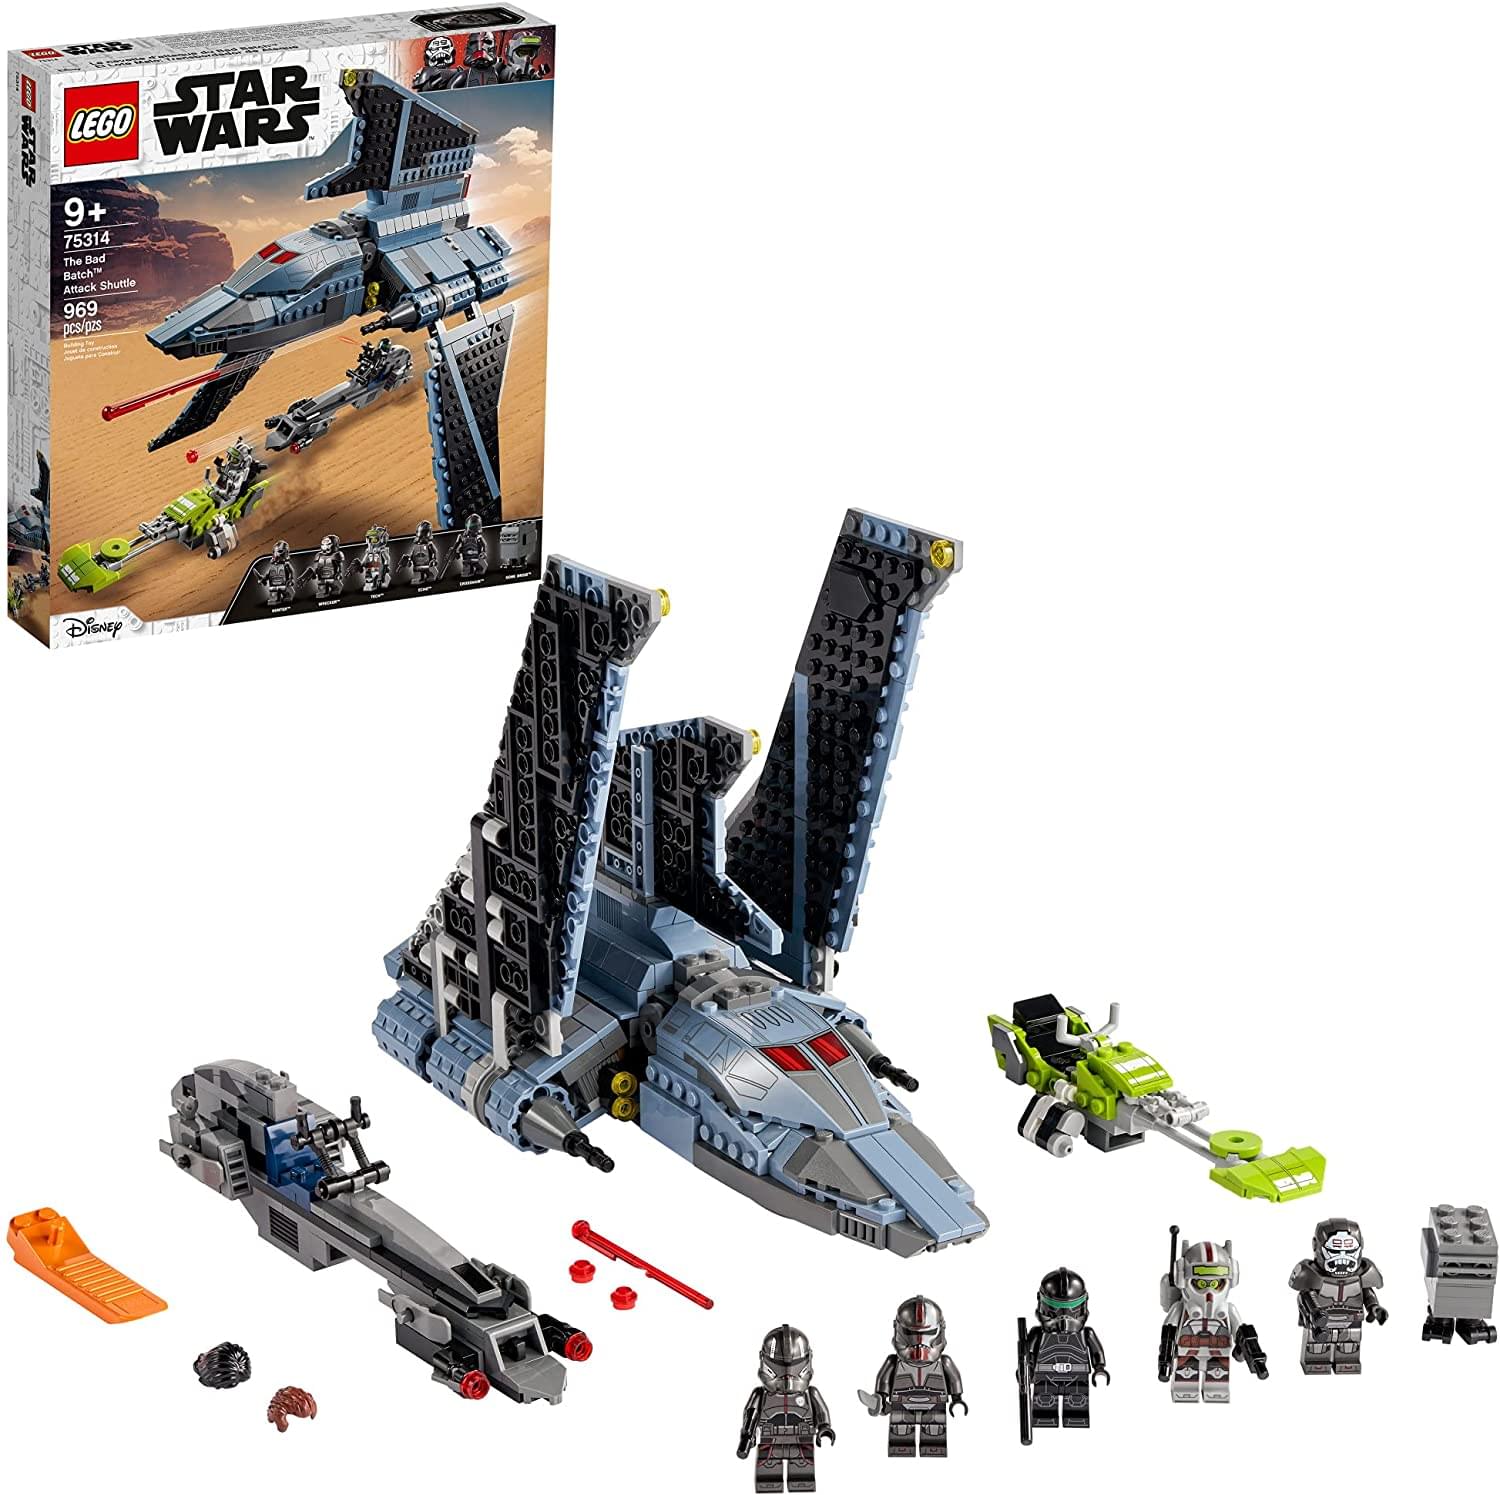 LEGO Star Wars 75314 The Bad Batch Attack Shuttle 969 Piece Building Kit